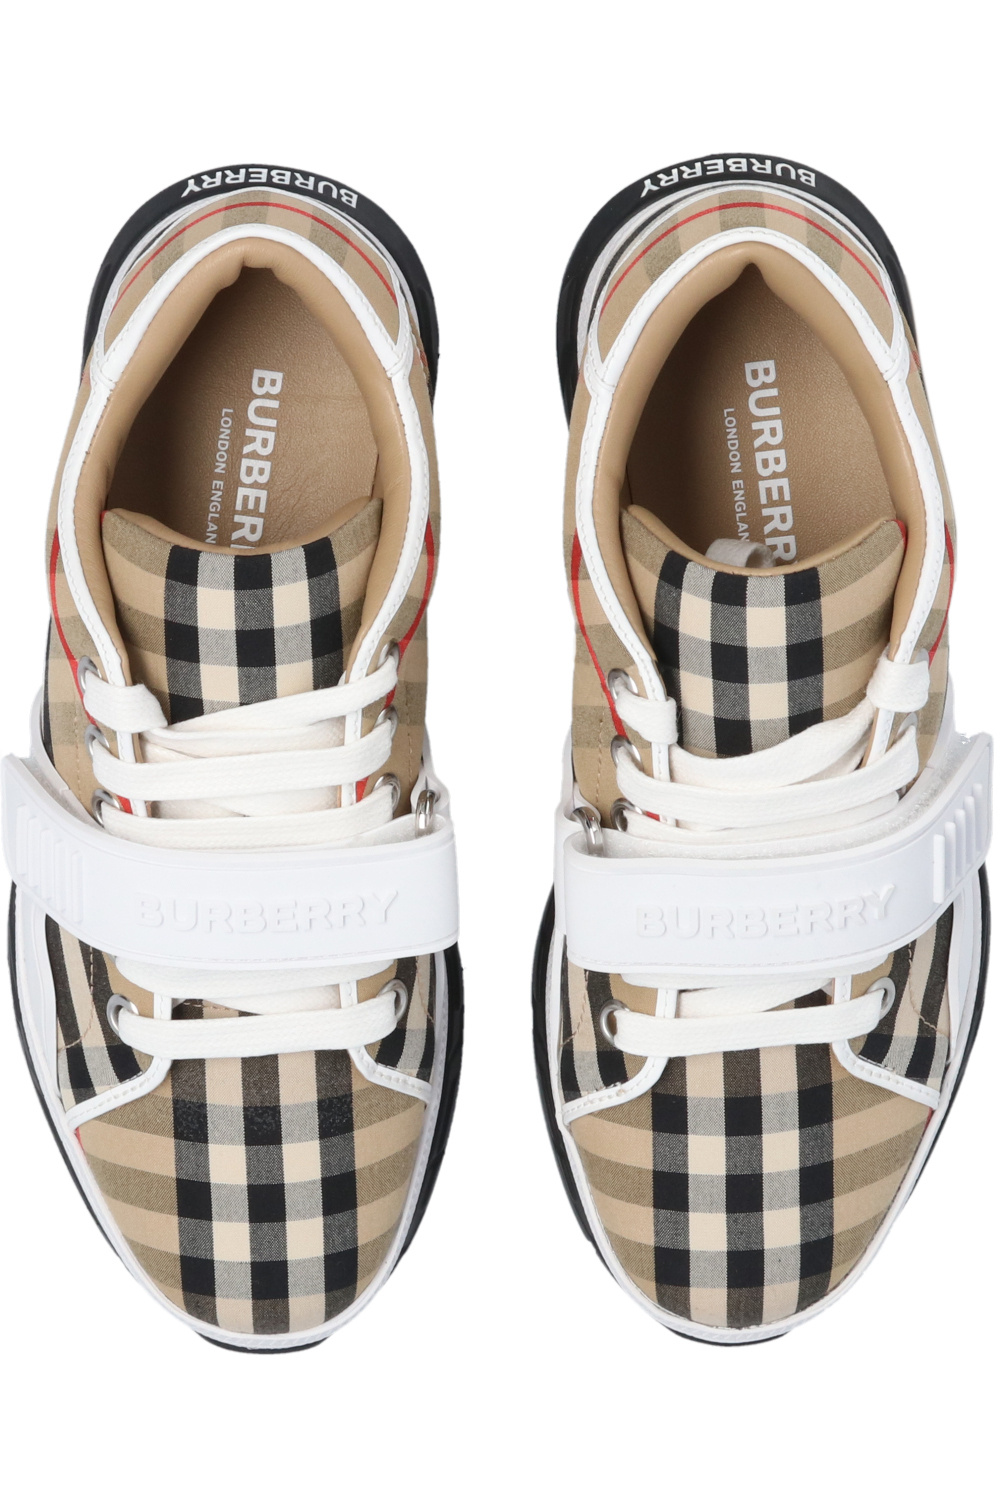 Kids's Kids shoes (25 | IetpShops - 39) | heeled sandals burberry shoes  charcoal chk | Burberry Kids Checked sneakers